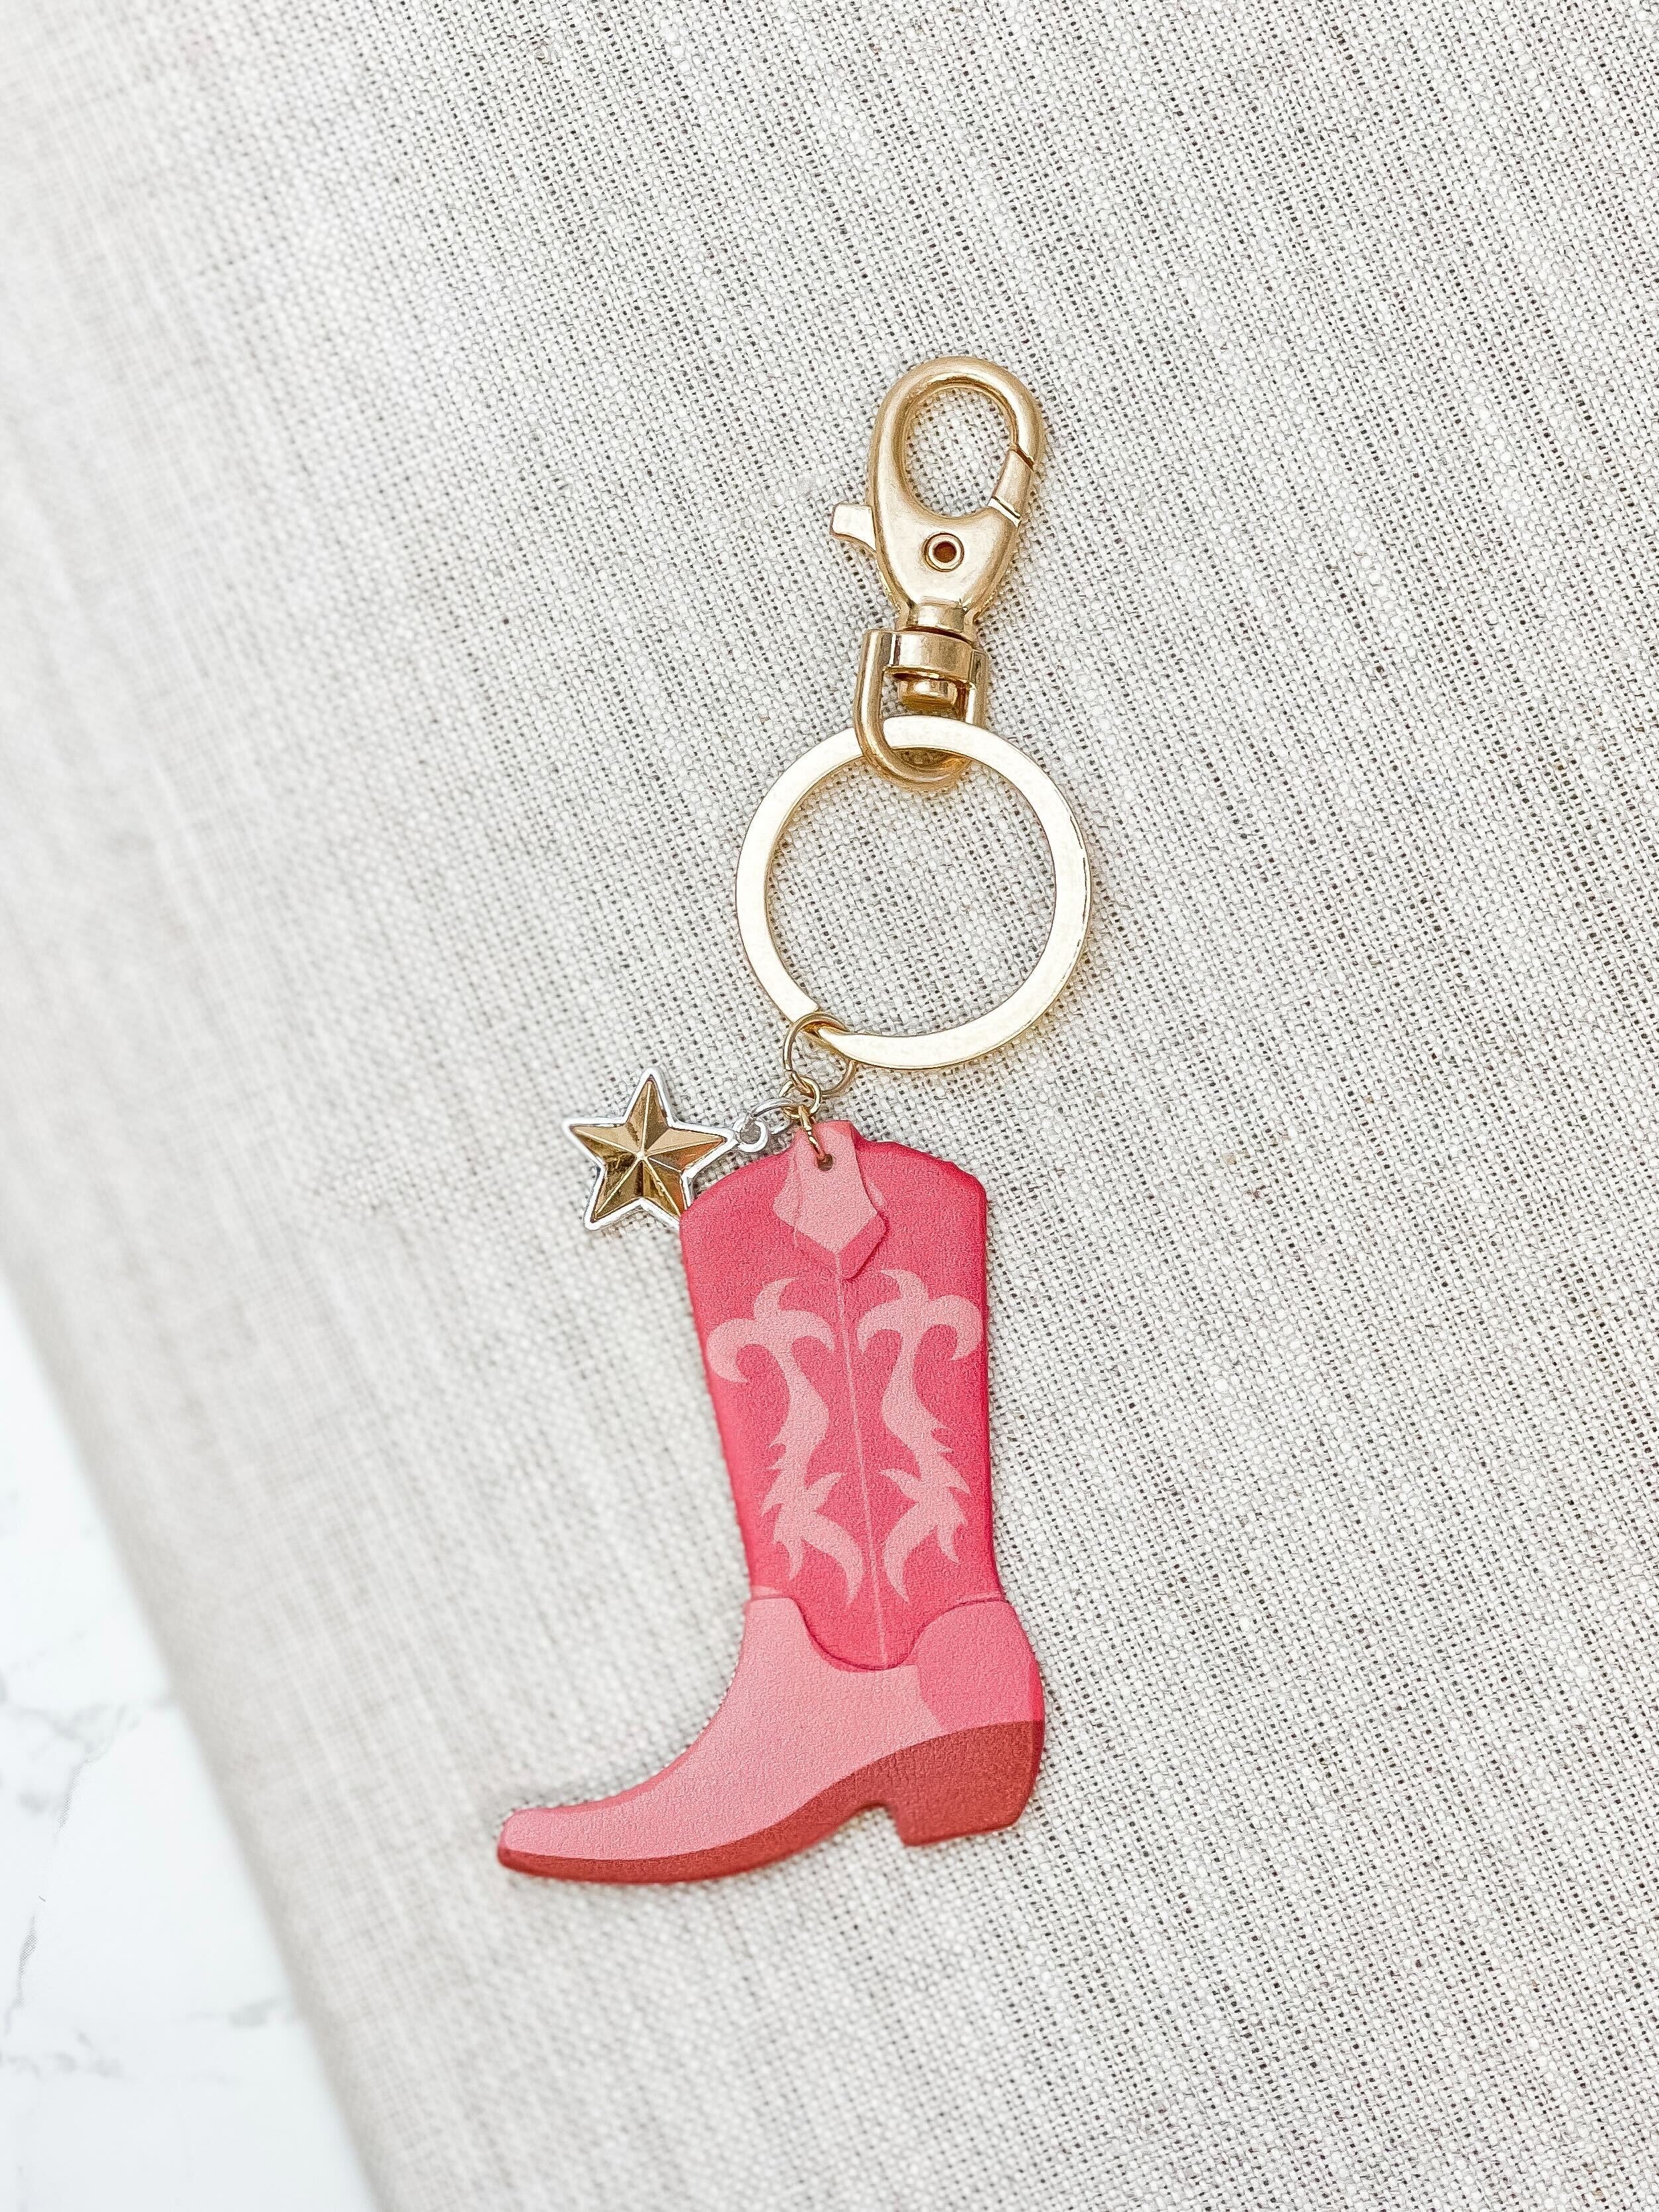 'Howdy' Pink Cowgirl Boot Keychain